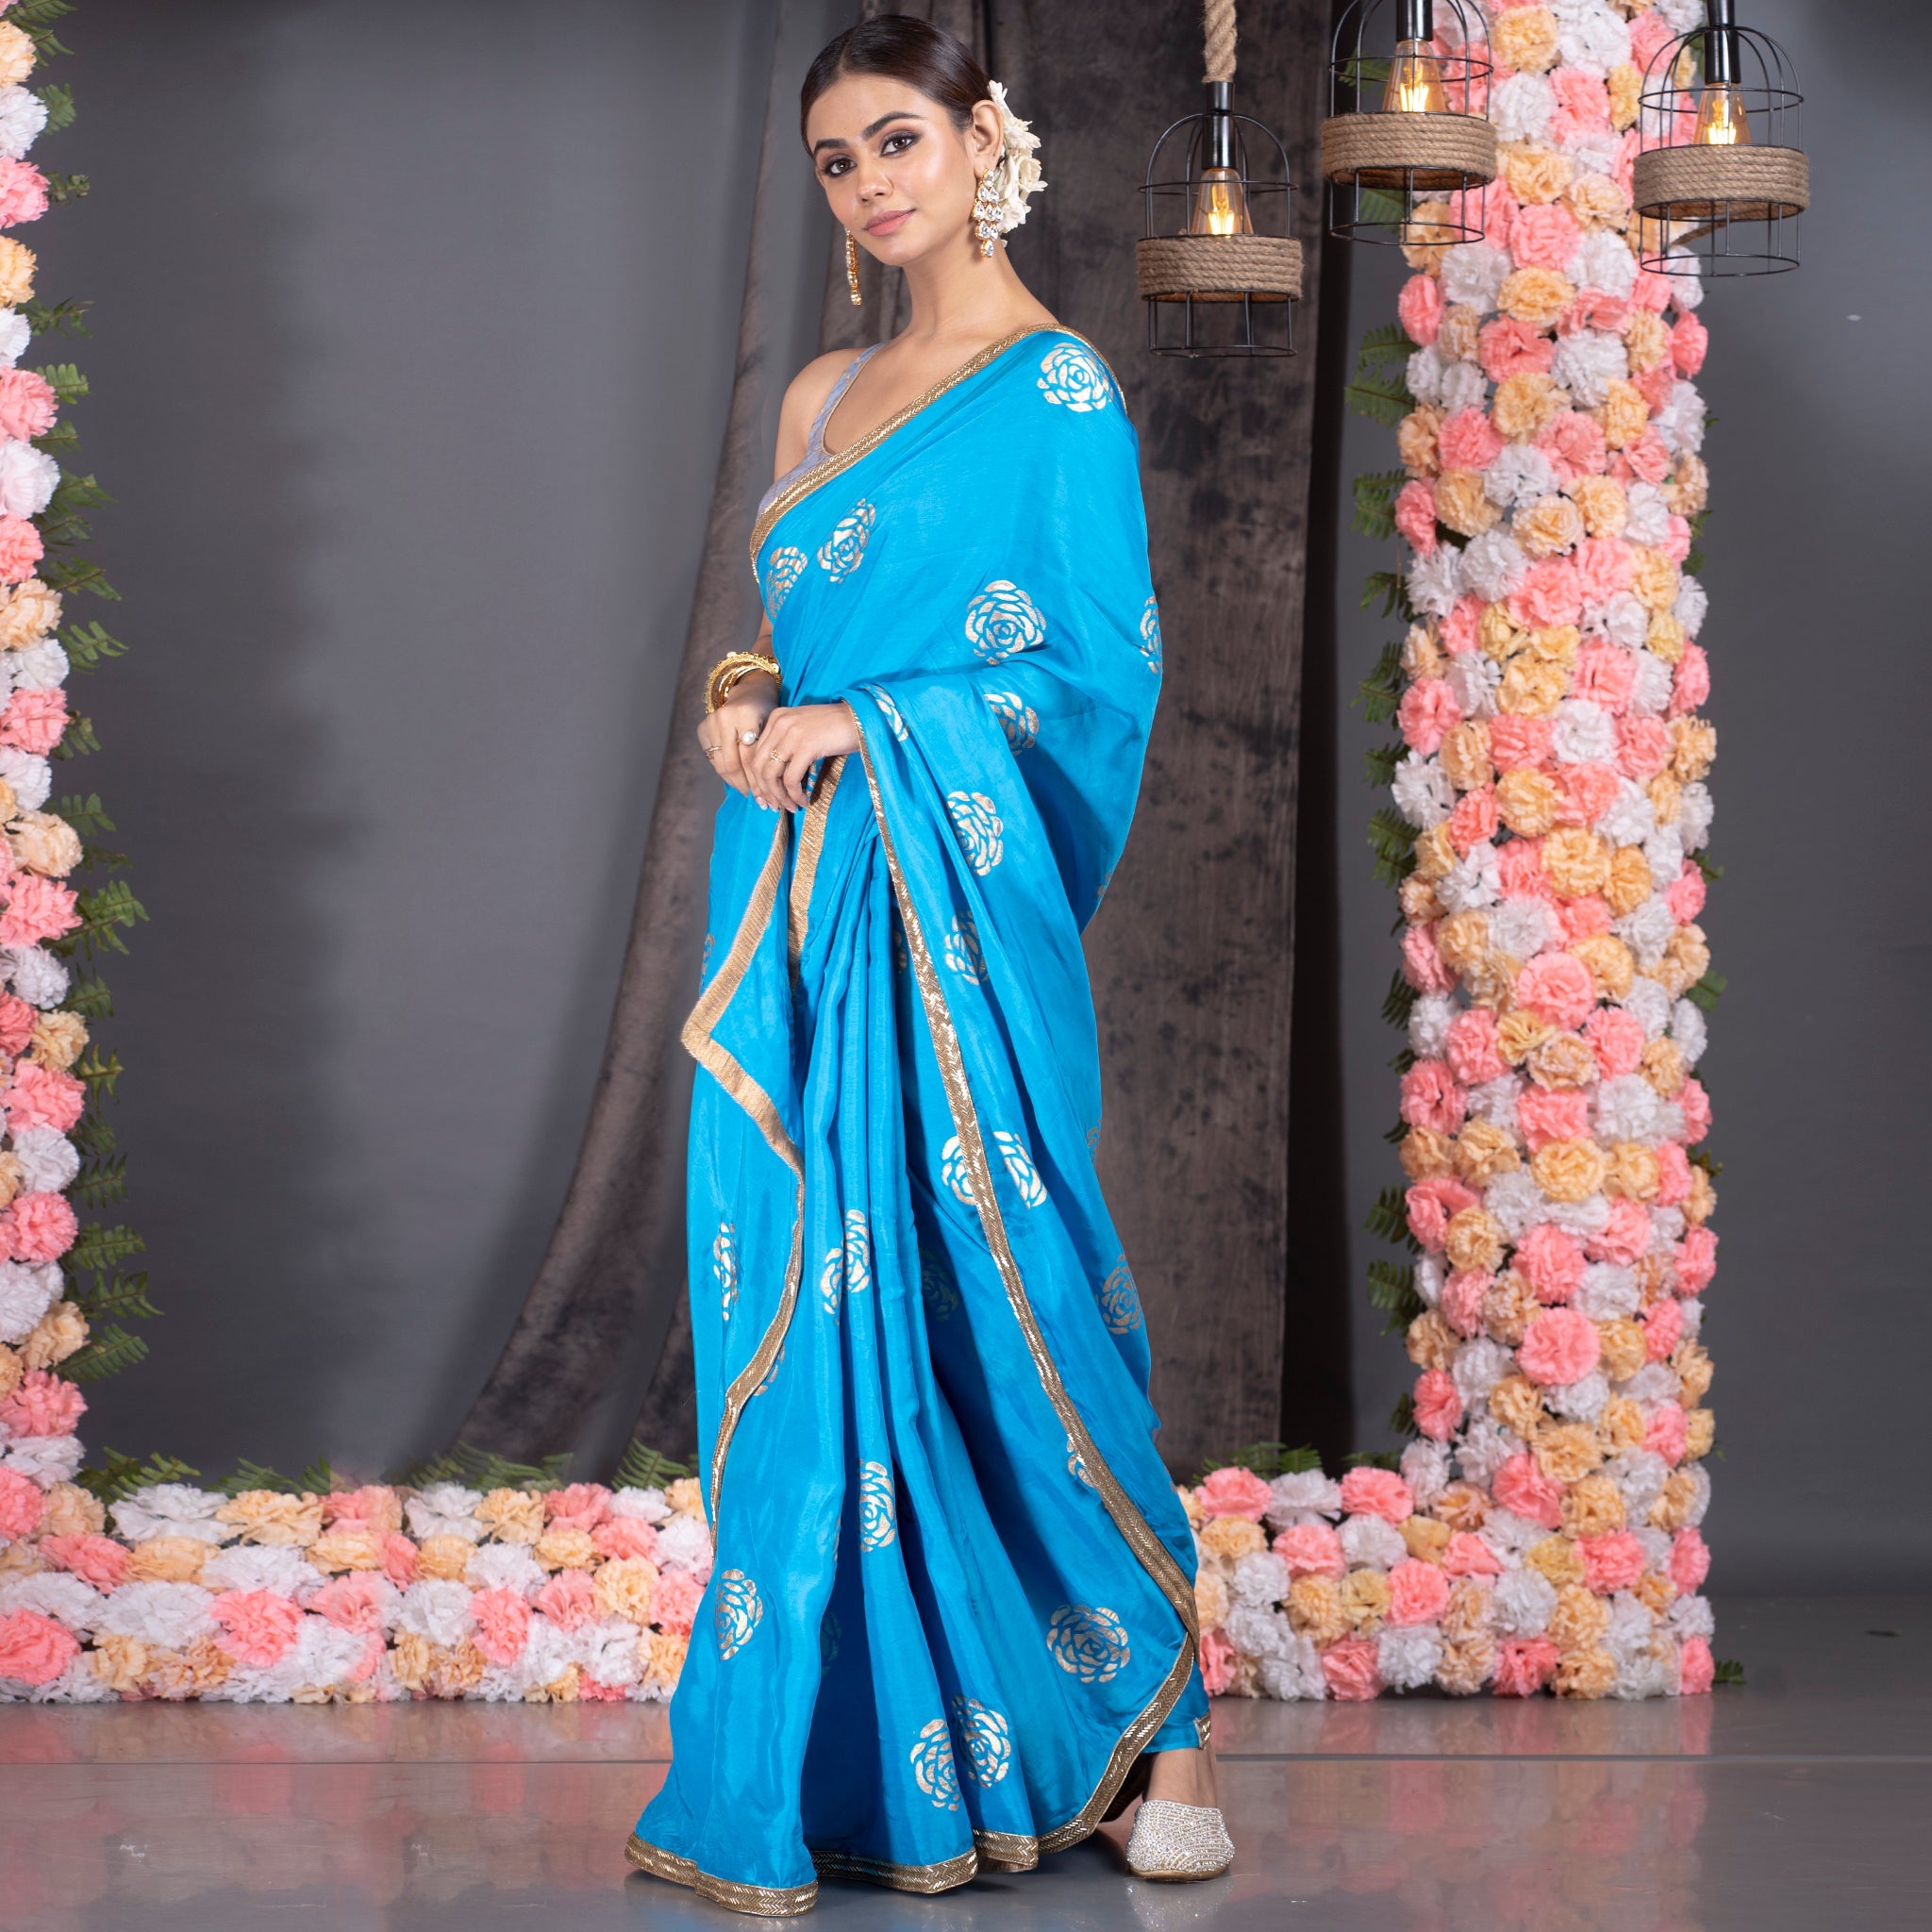 Women's Cerulean Blue Habutai Silk Saree With Gold Print And Hand Embroidered Lace Border - Boveee